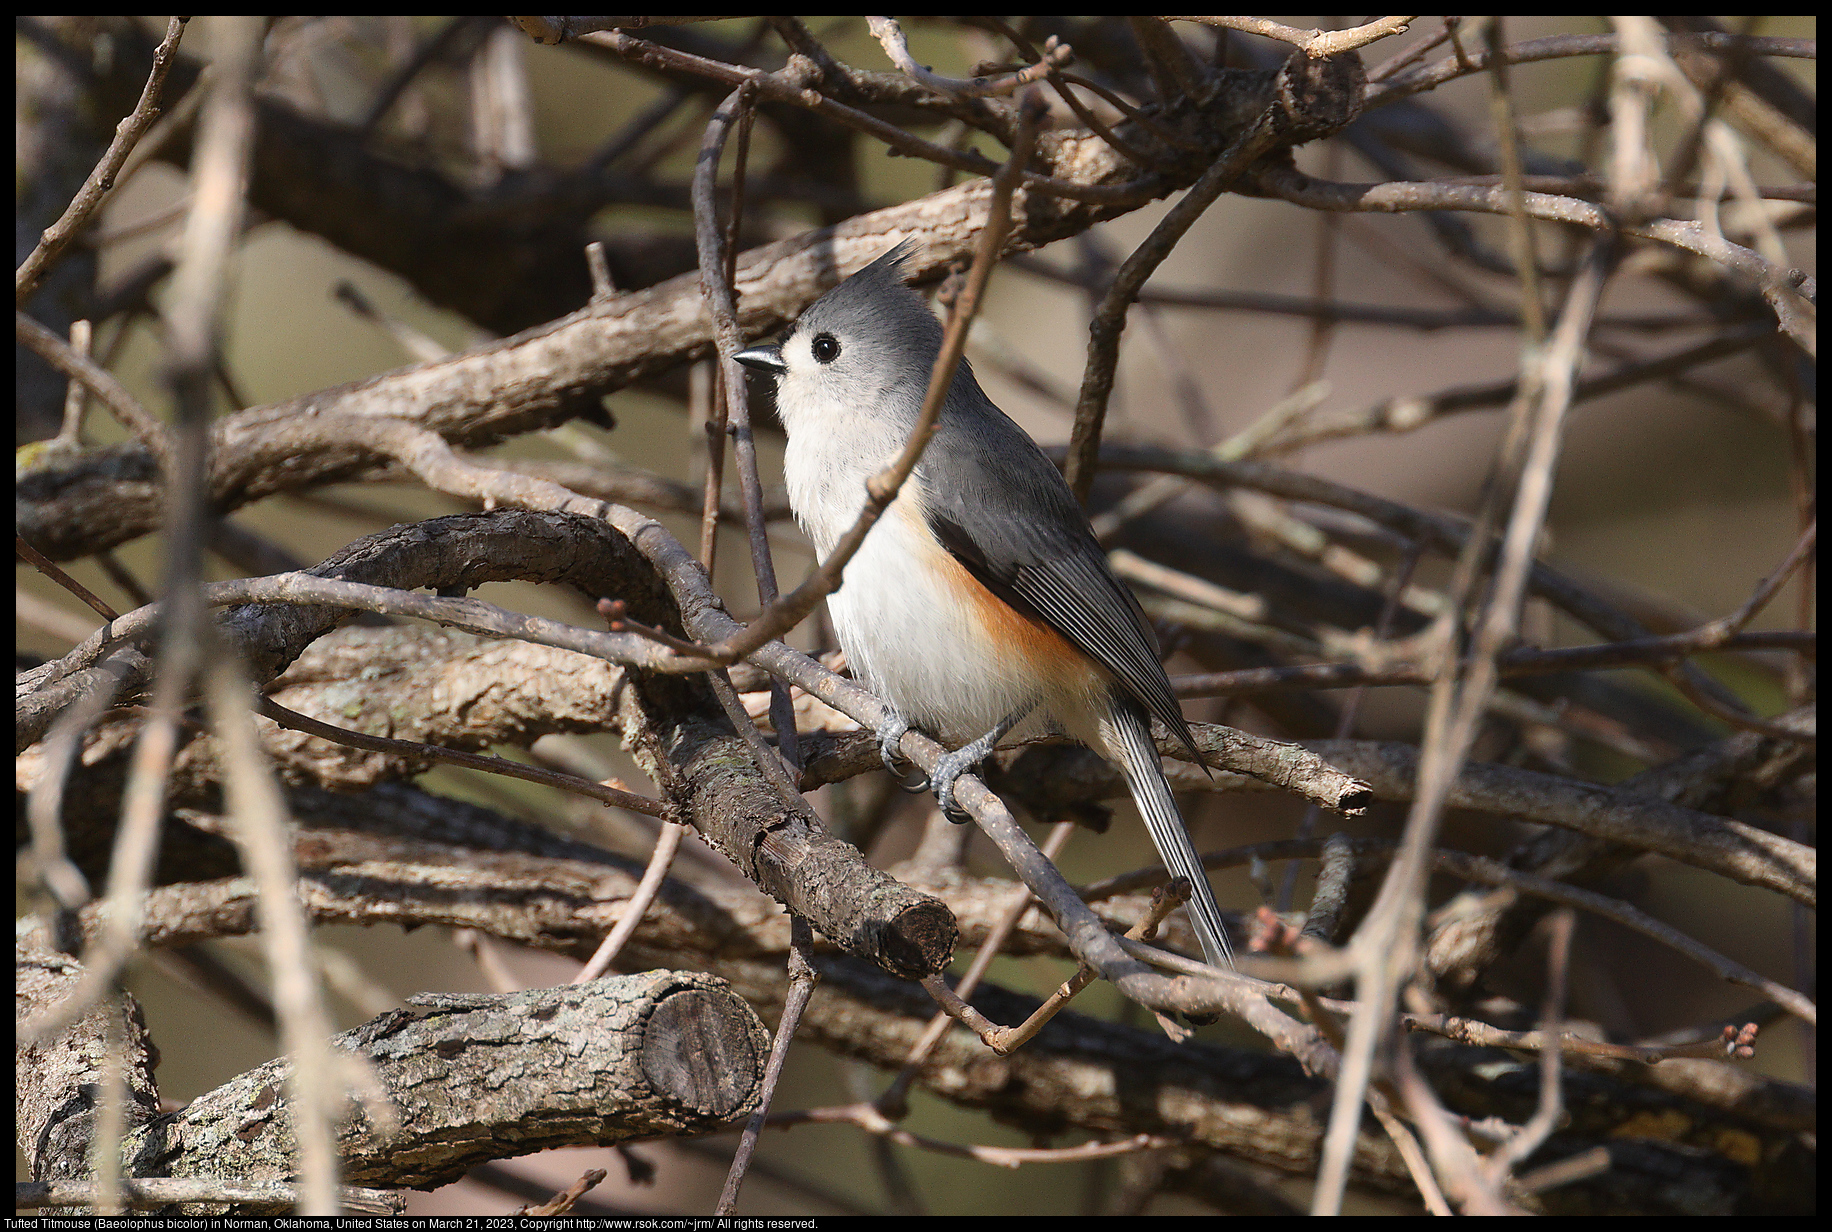 Tufted Titmouse (Baeolophus bicolor) in Norman, Oklahoma, United States on March 21, 2023